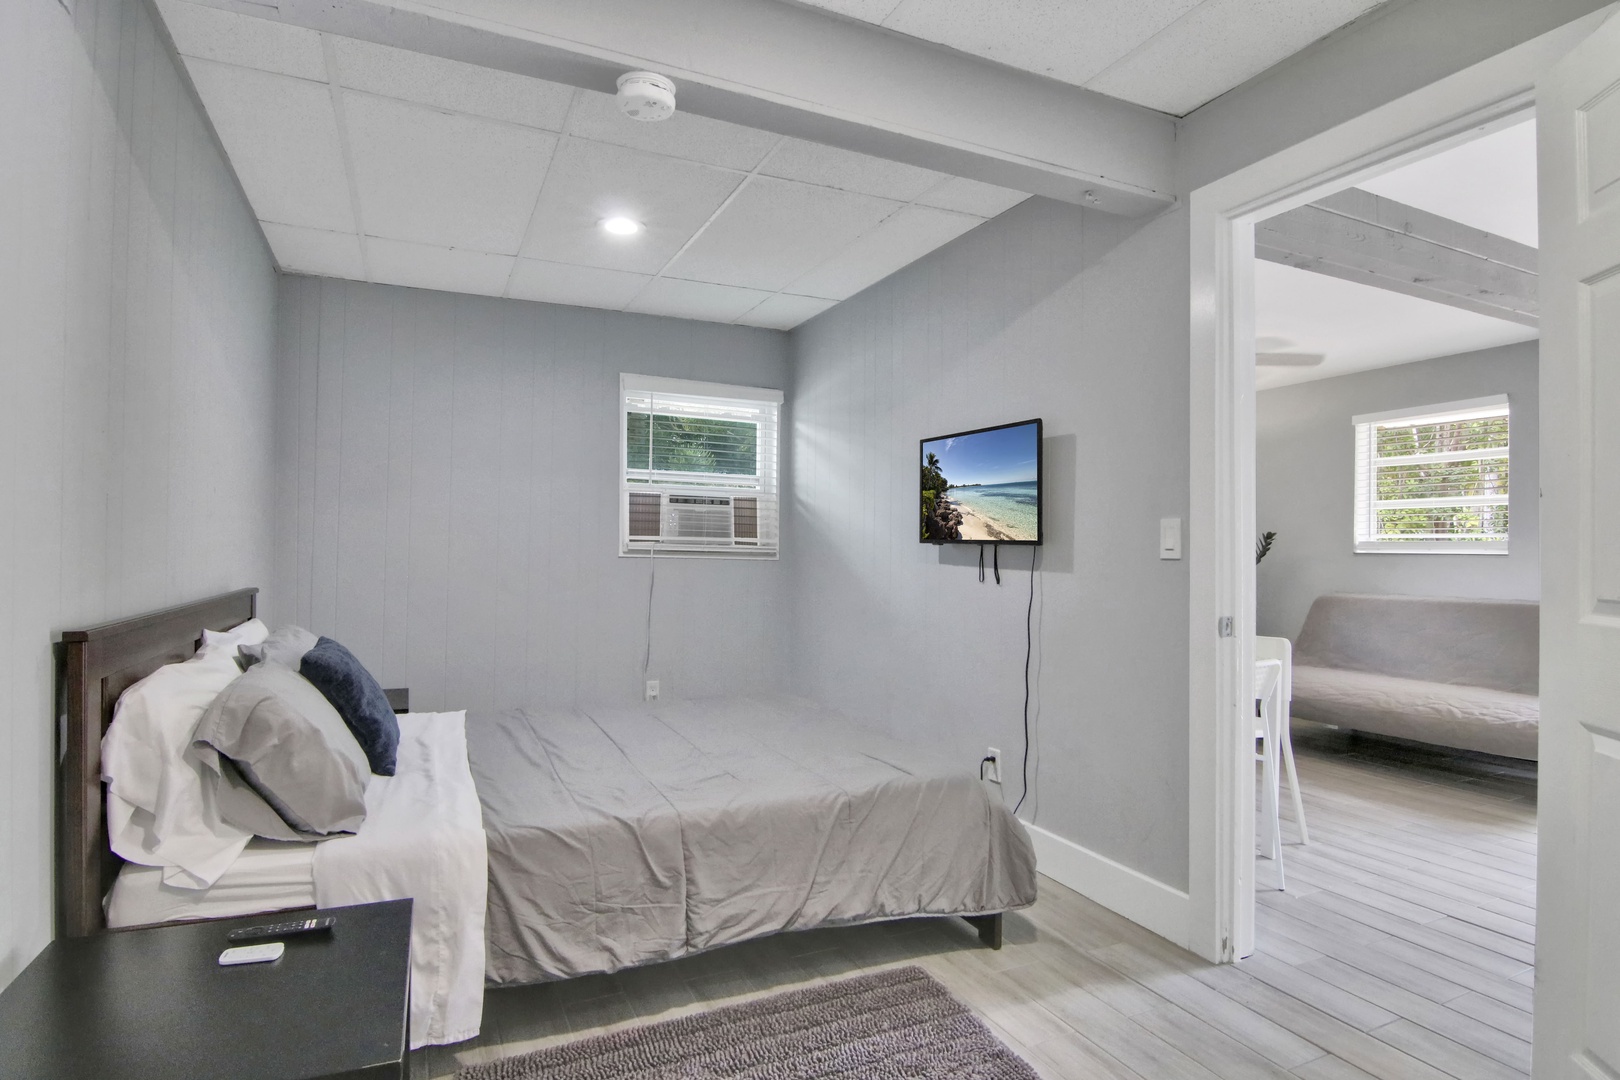 Unit 1: The serene bedroom offers a queen bed & Smart TV